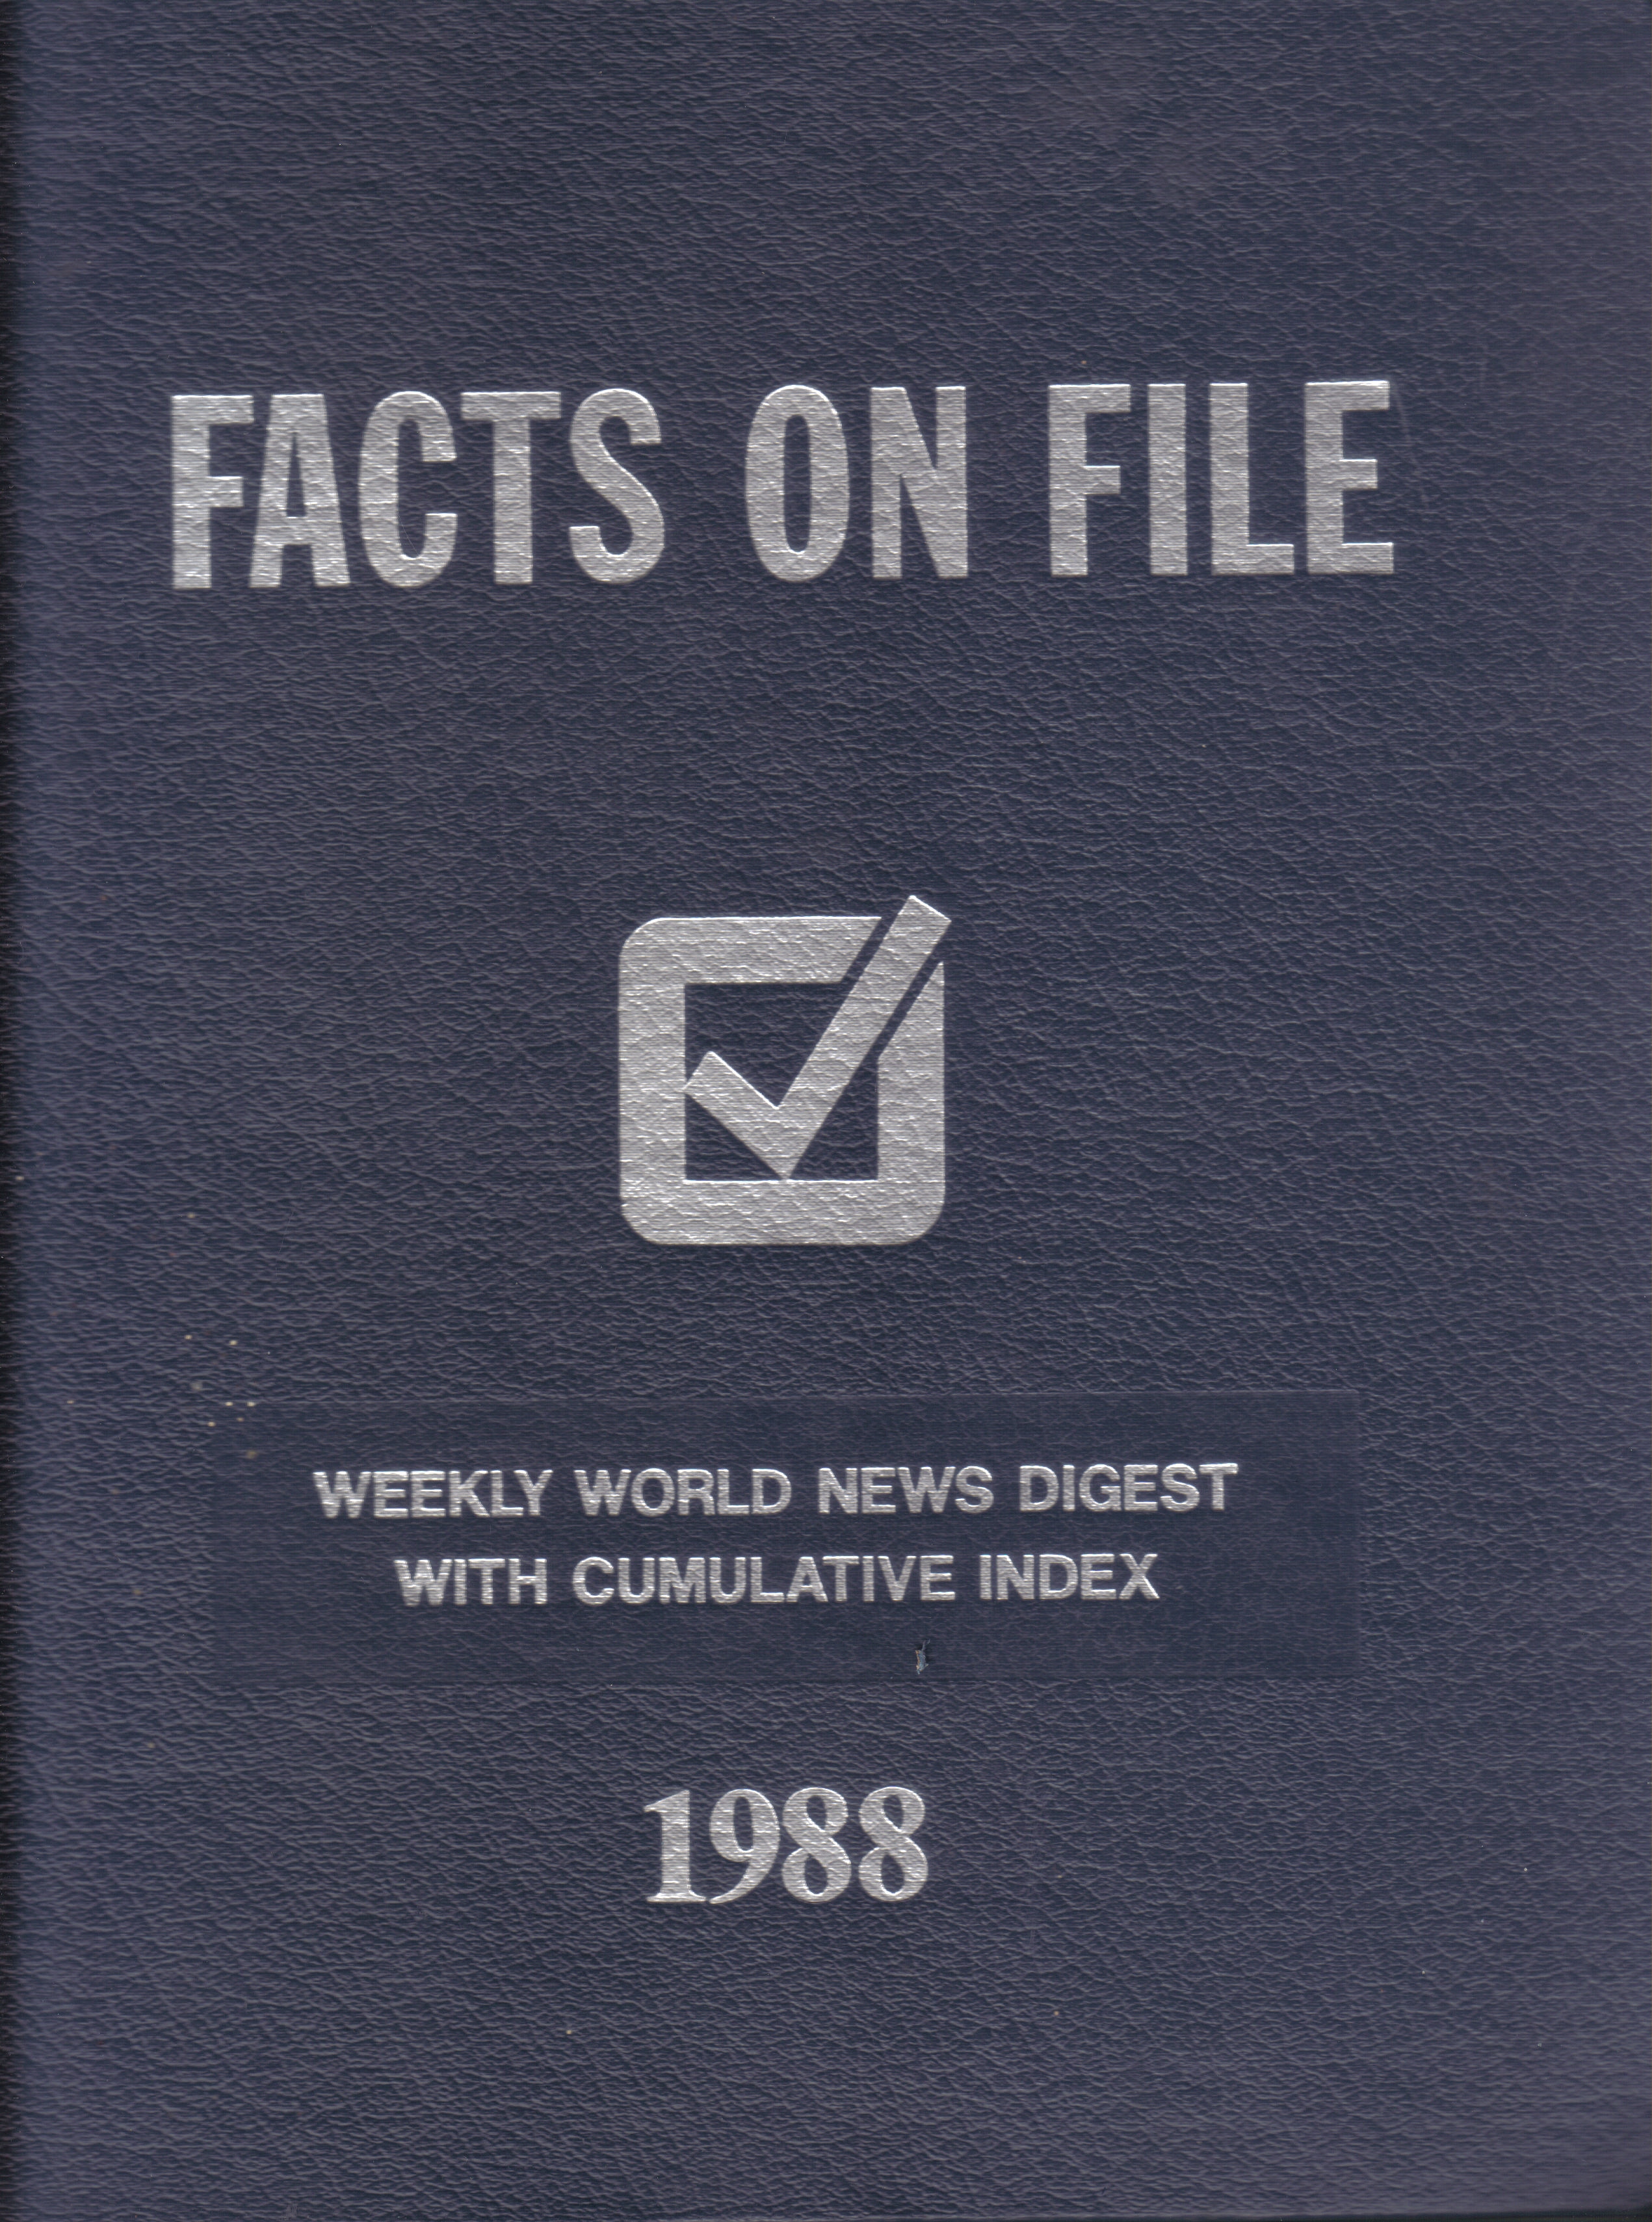 Facts on File  Facts on File Volume 48 1988 